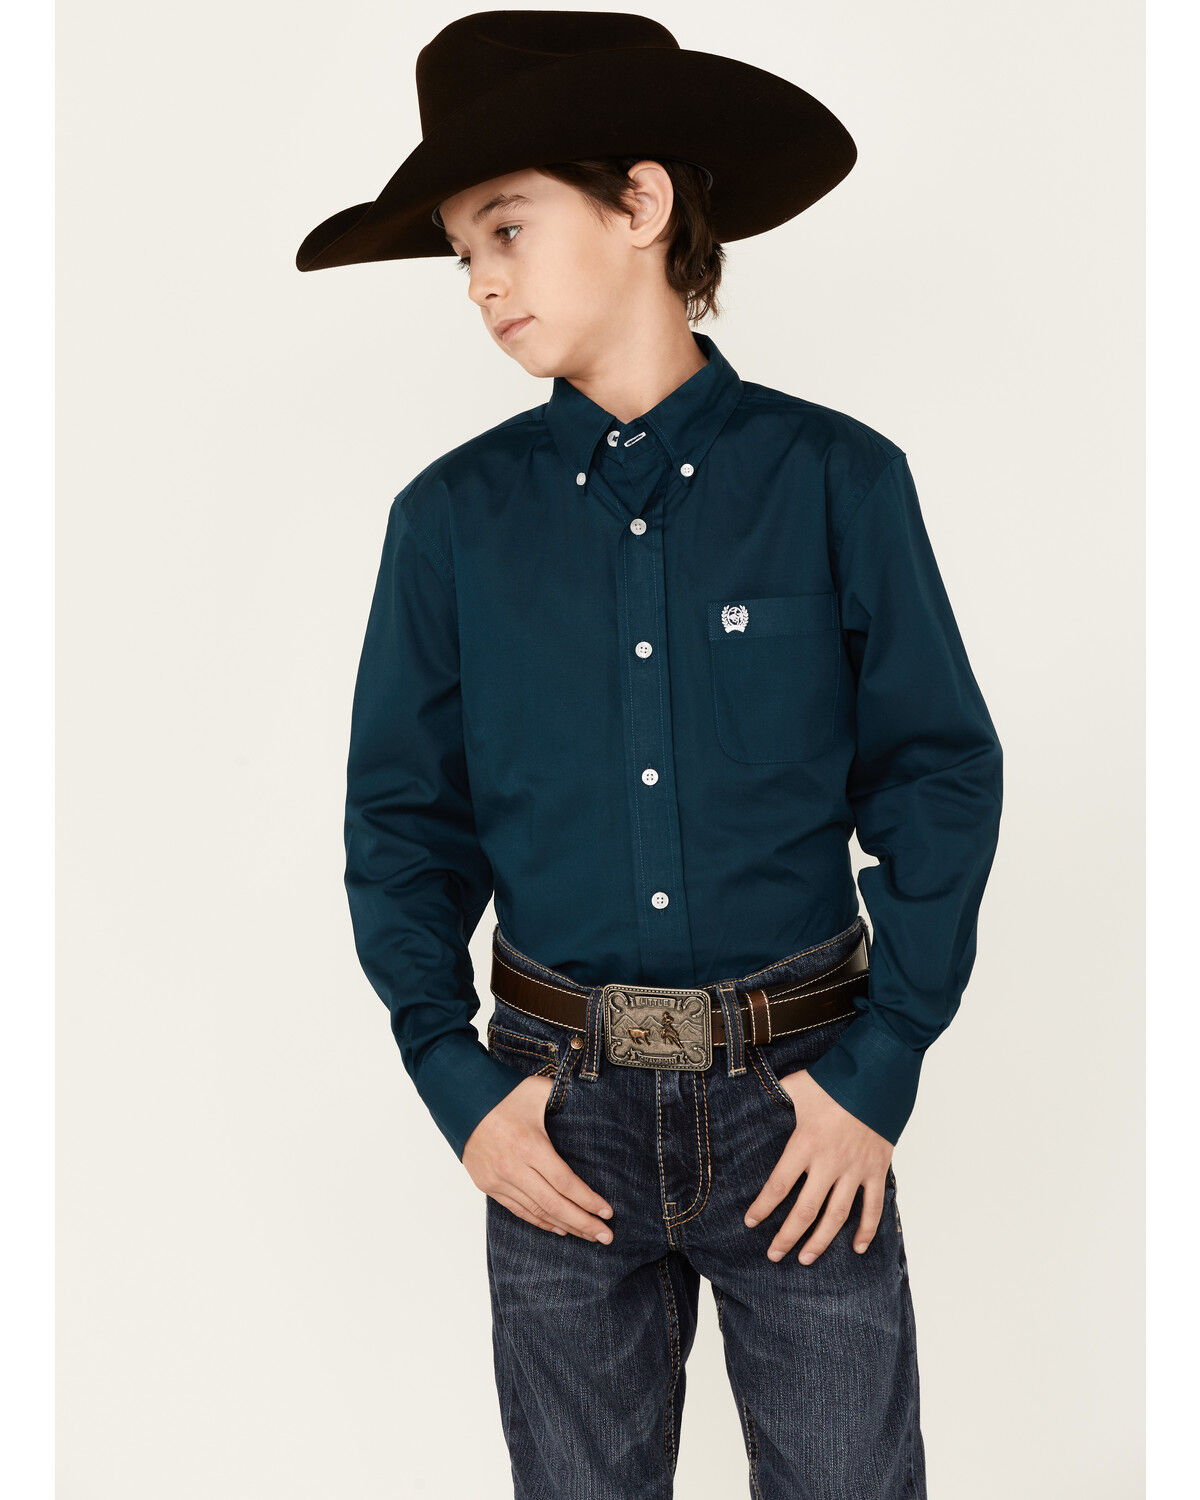 BOY'S Western SUITS Long Cowboy Rancher  SIZES 2 to 20 CLOSE OUT AND NO TAX SELL 